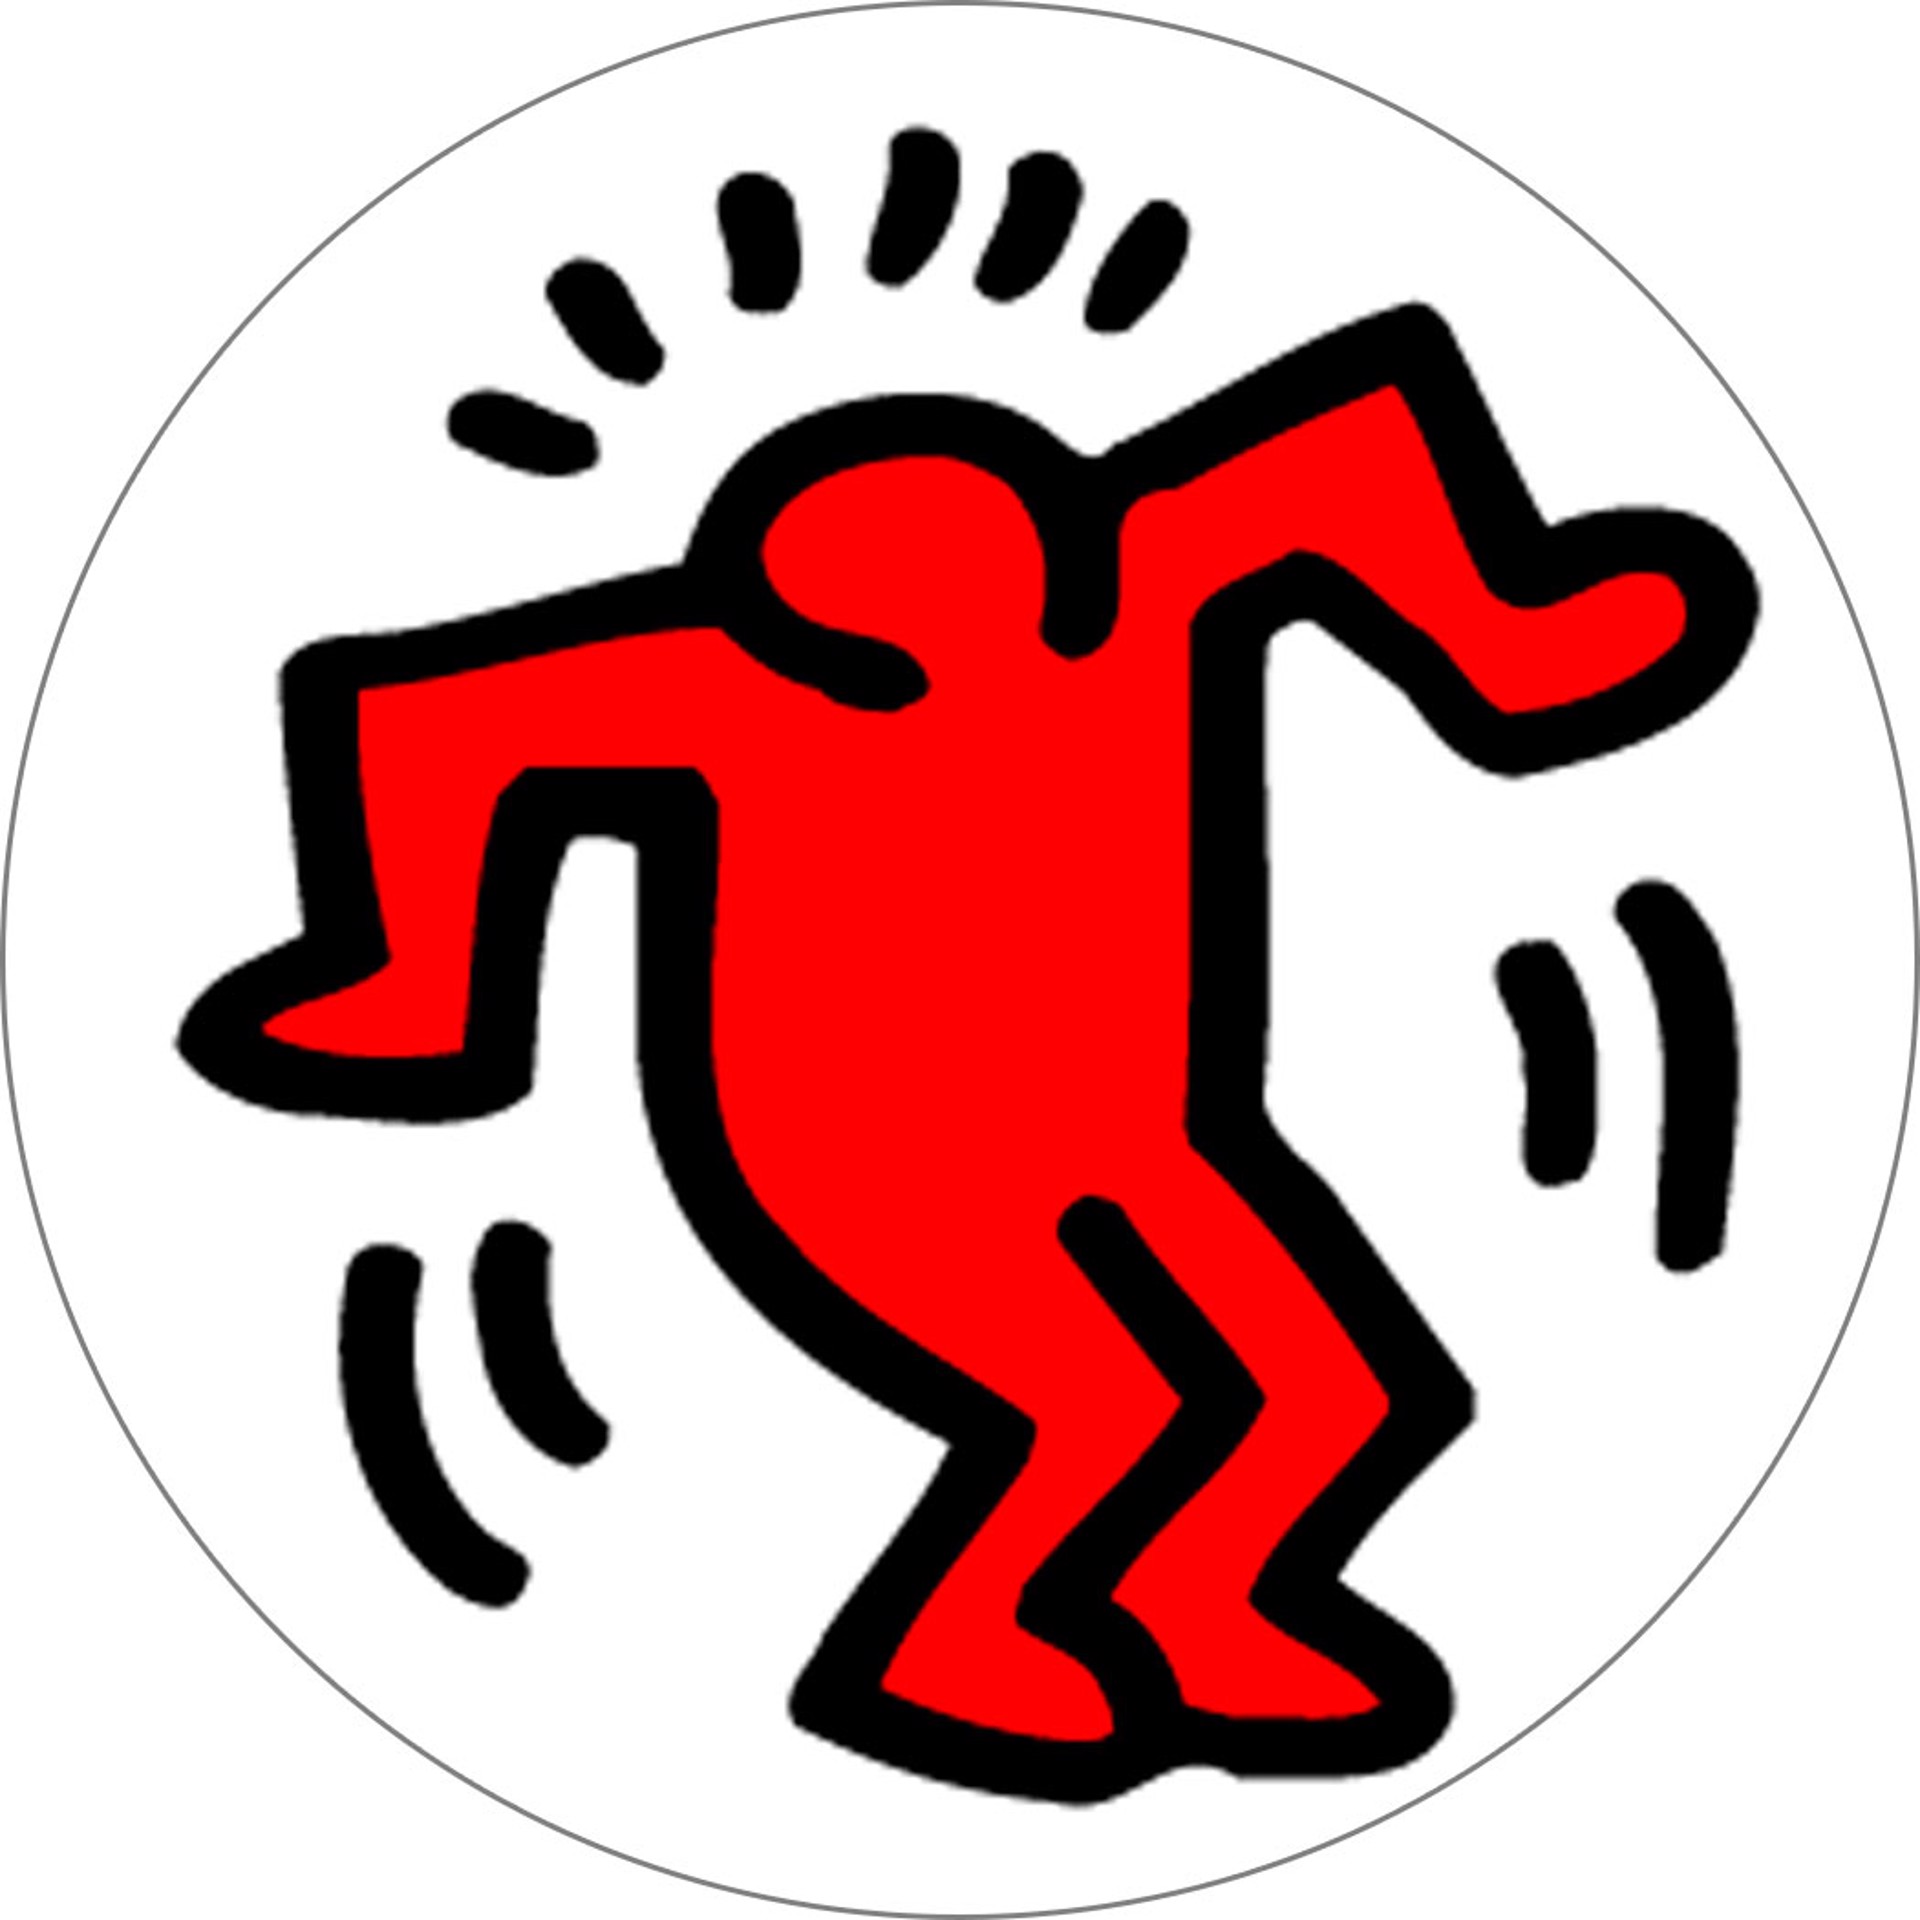 Keith Haring Red Guy on White 1 Inch Pin by Keith Haring